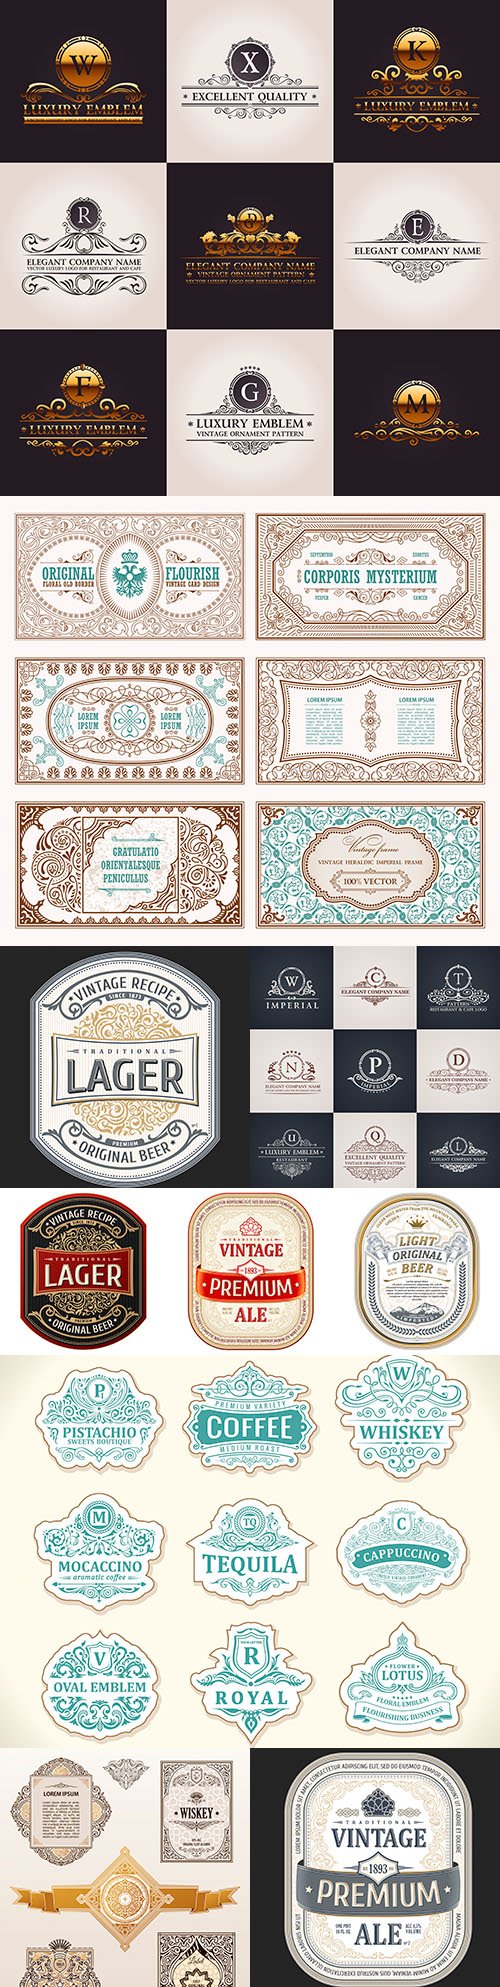 Vintage frames and luxury logos with ornament